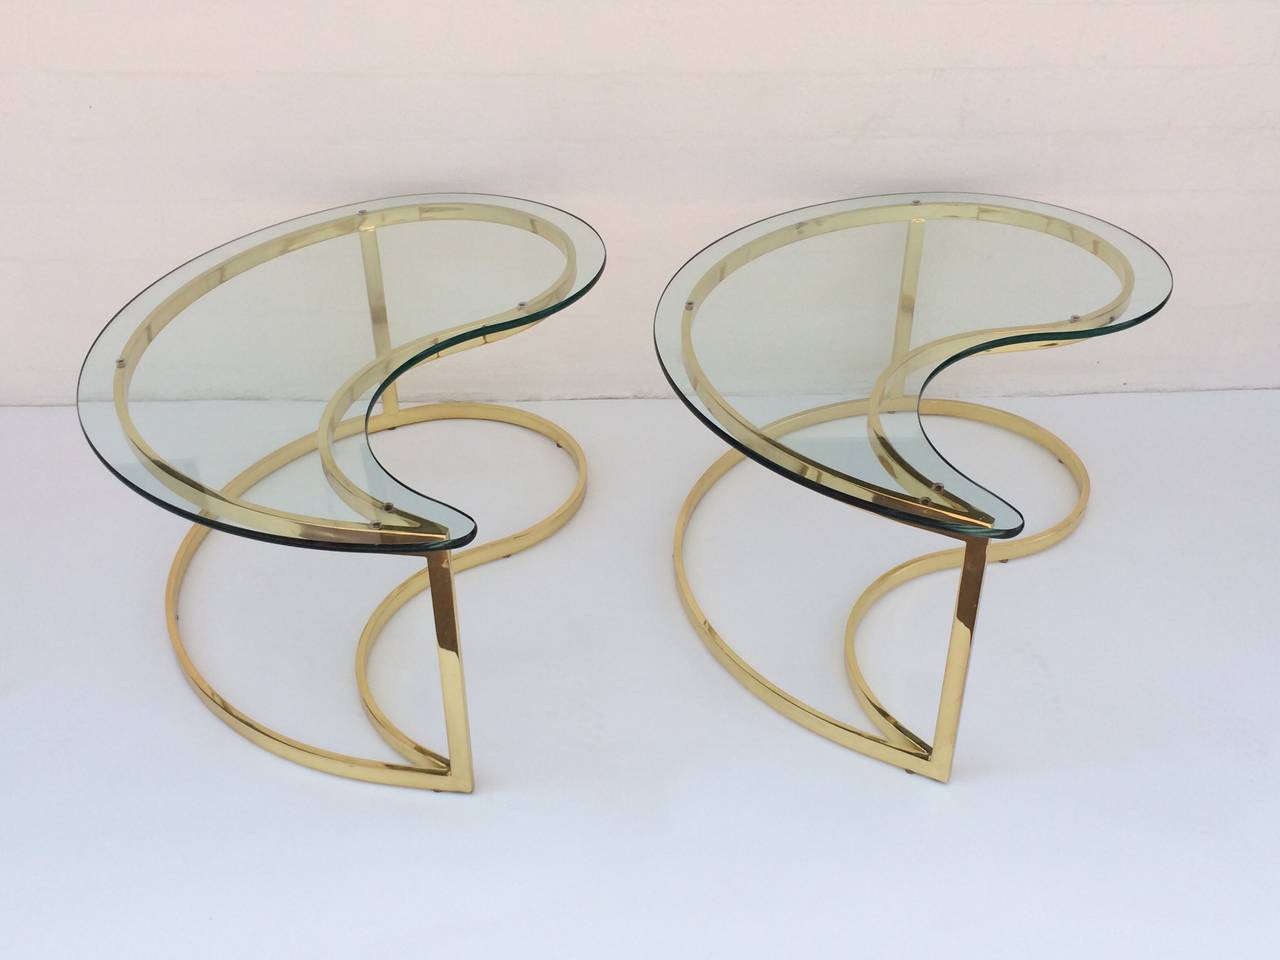 American Polished Brass and Glass Cocktail or Coffee Tables Designed by Milo Baughman